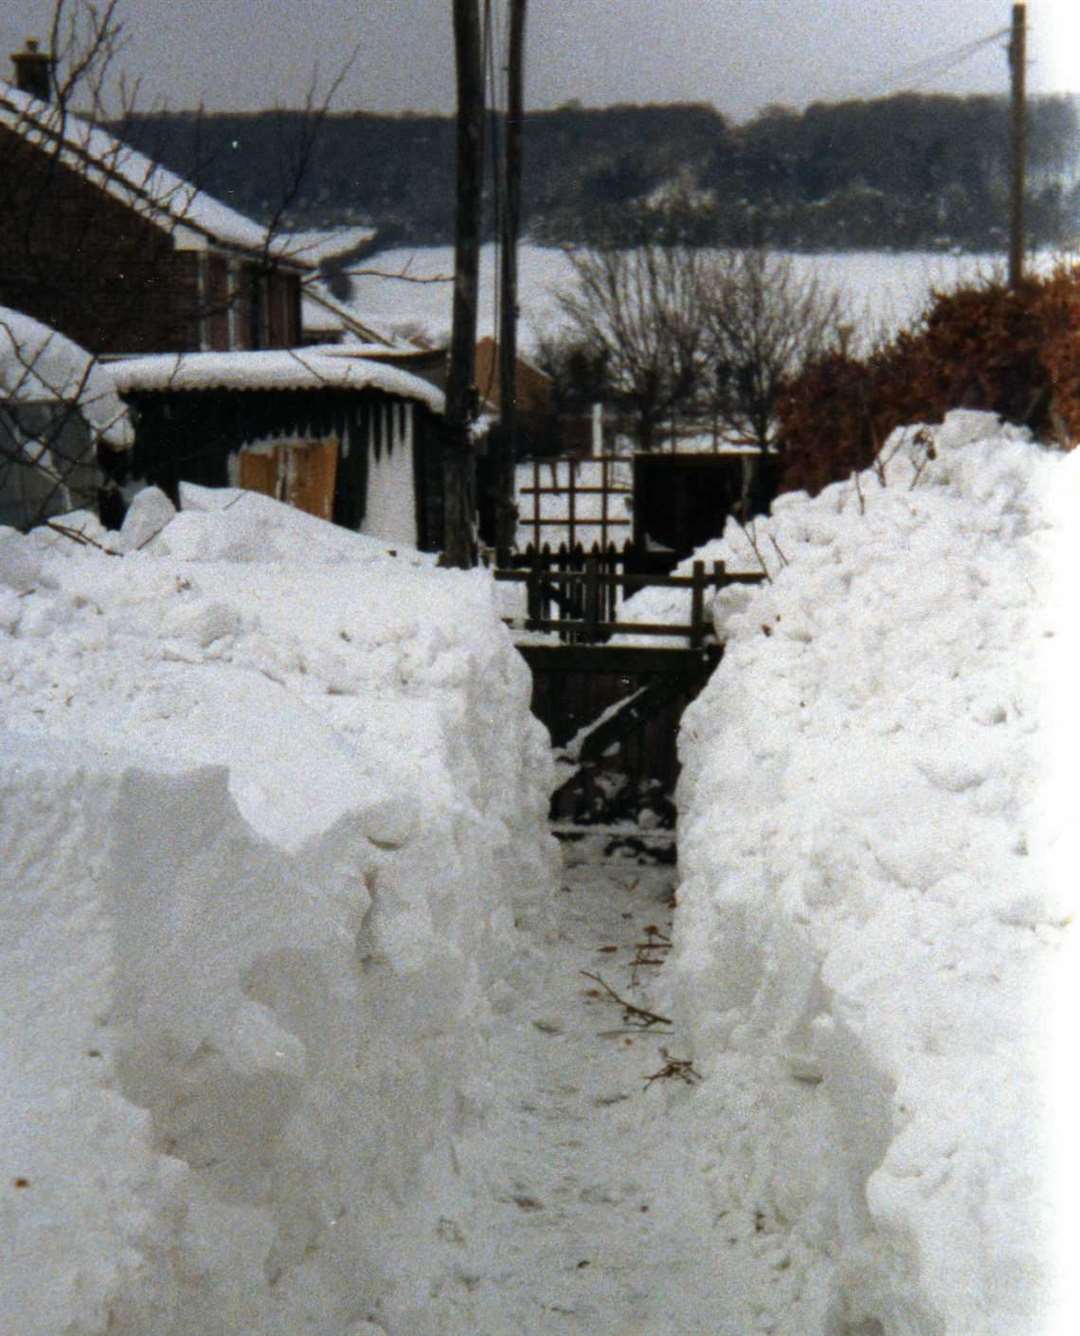 The avenue of snow would have taken days to melt. Picture: Mary Smith